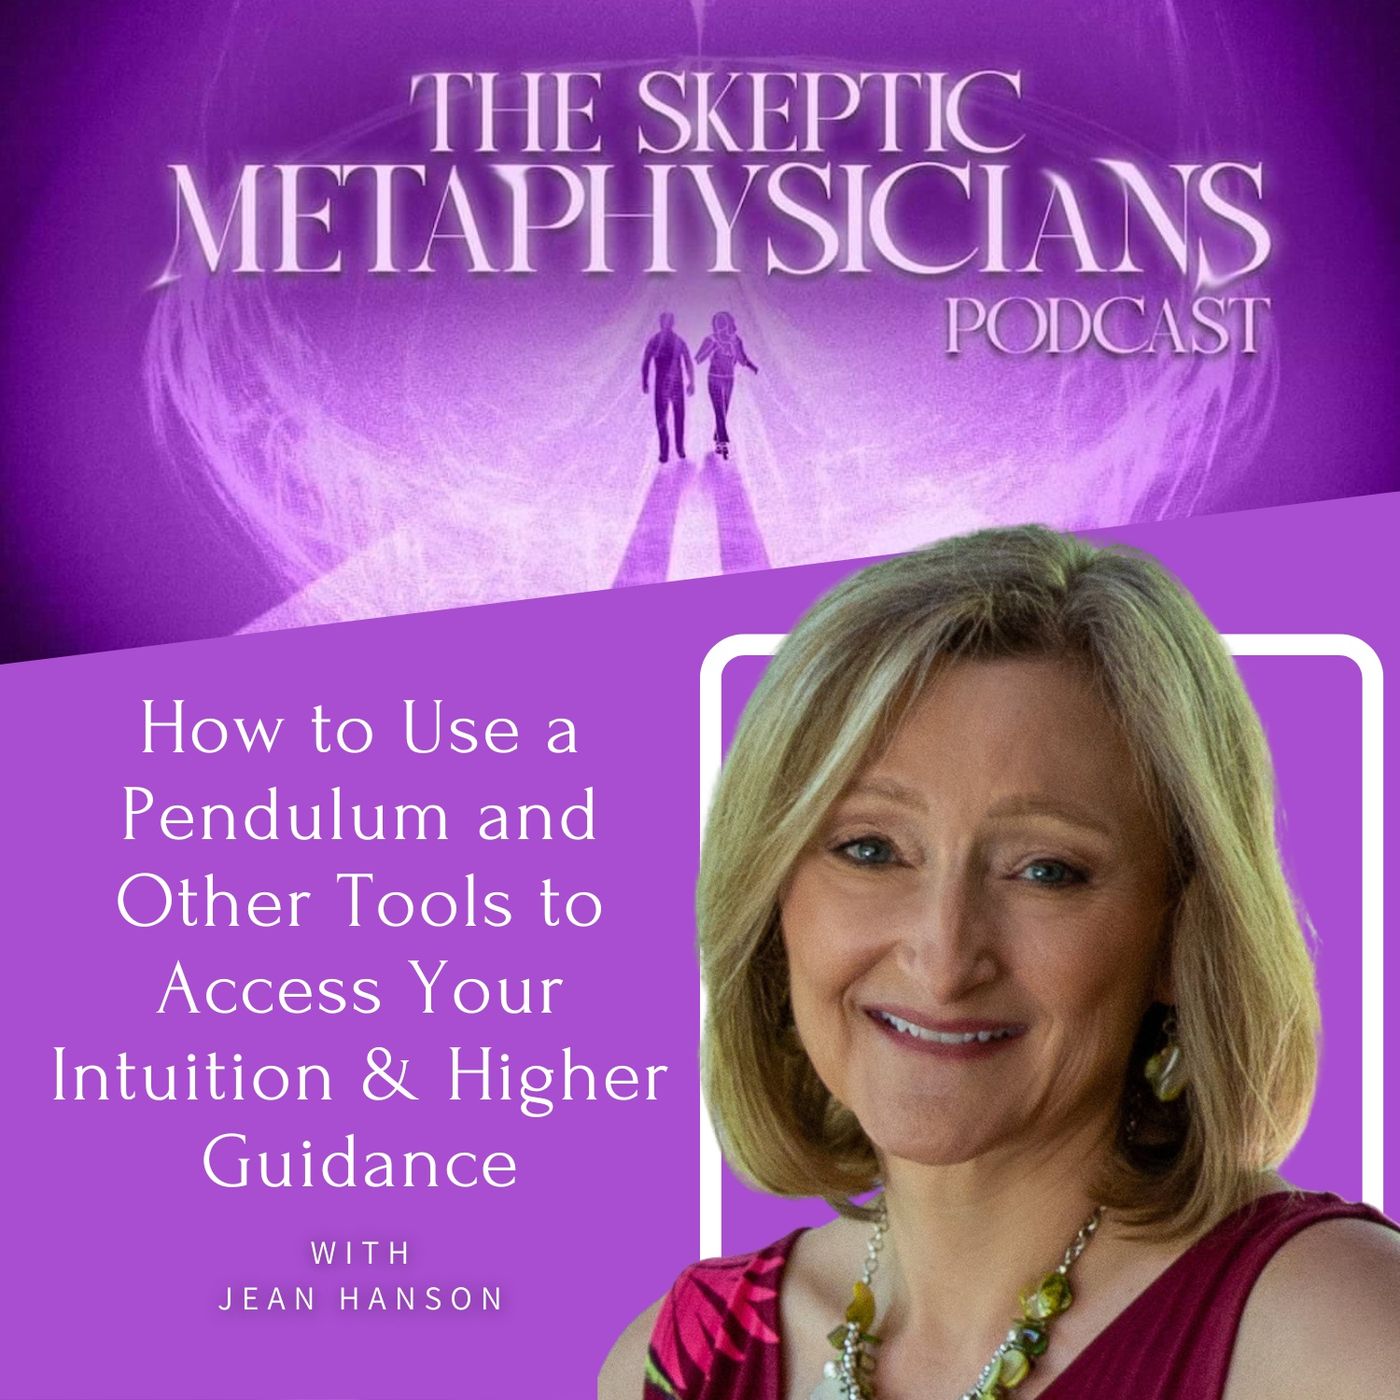 How to Use a Pendulum and Other Tools to Access Your Intuition and Higher Guidance | Jean Hanson